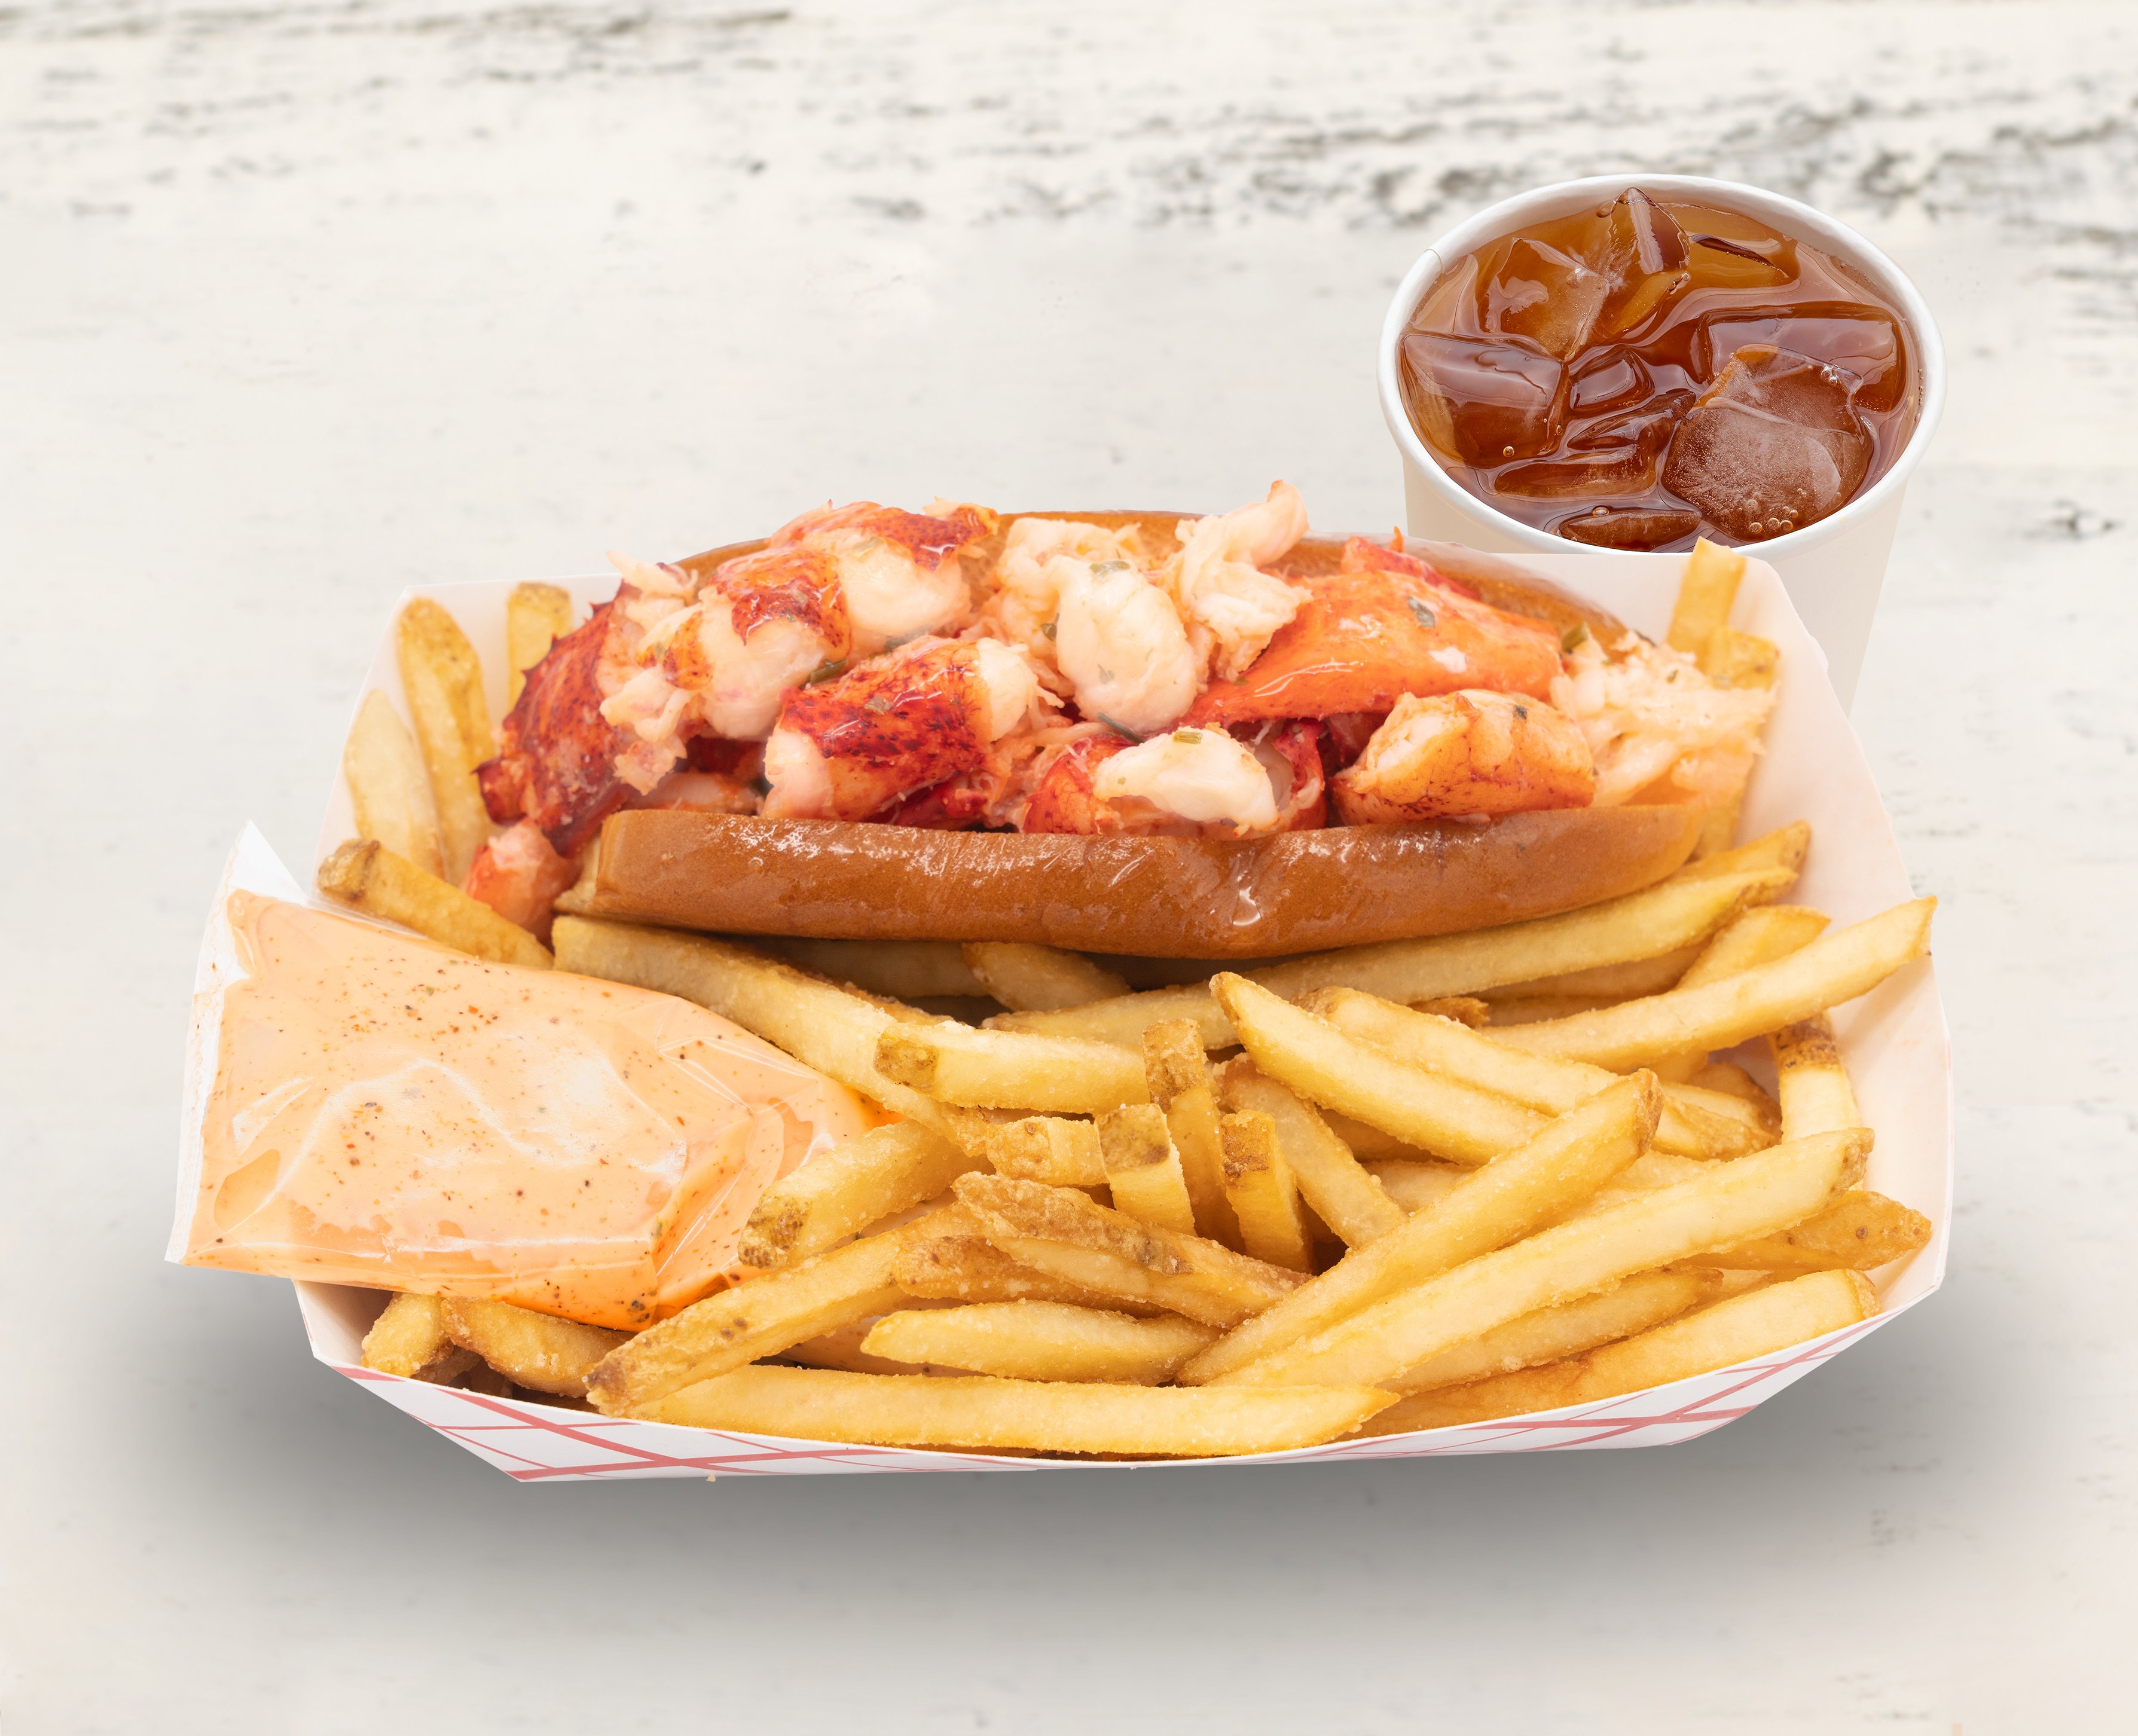 Image for #2 Warm Lobster Roll with Seasoned Lemon Butter